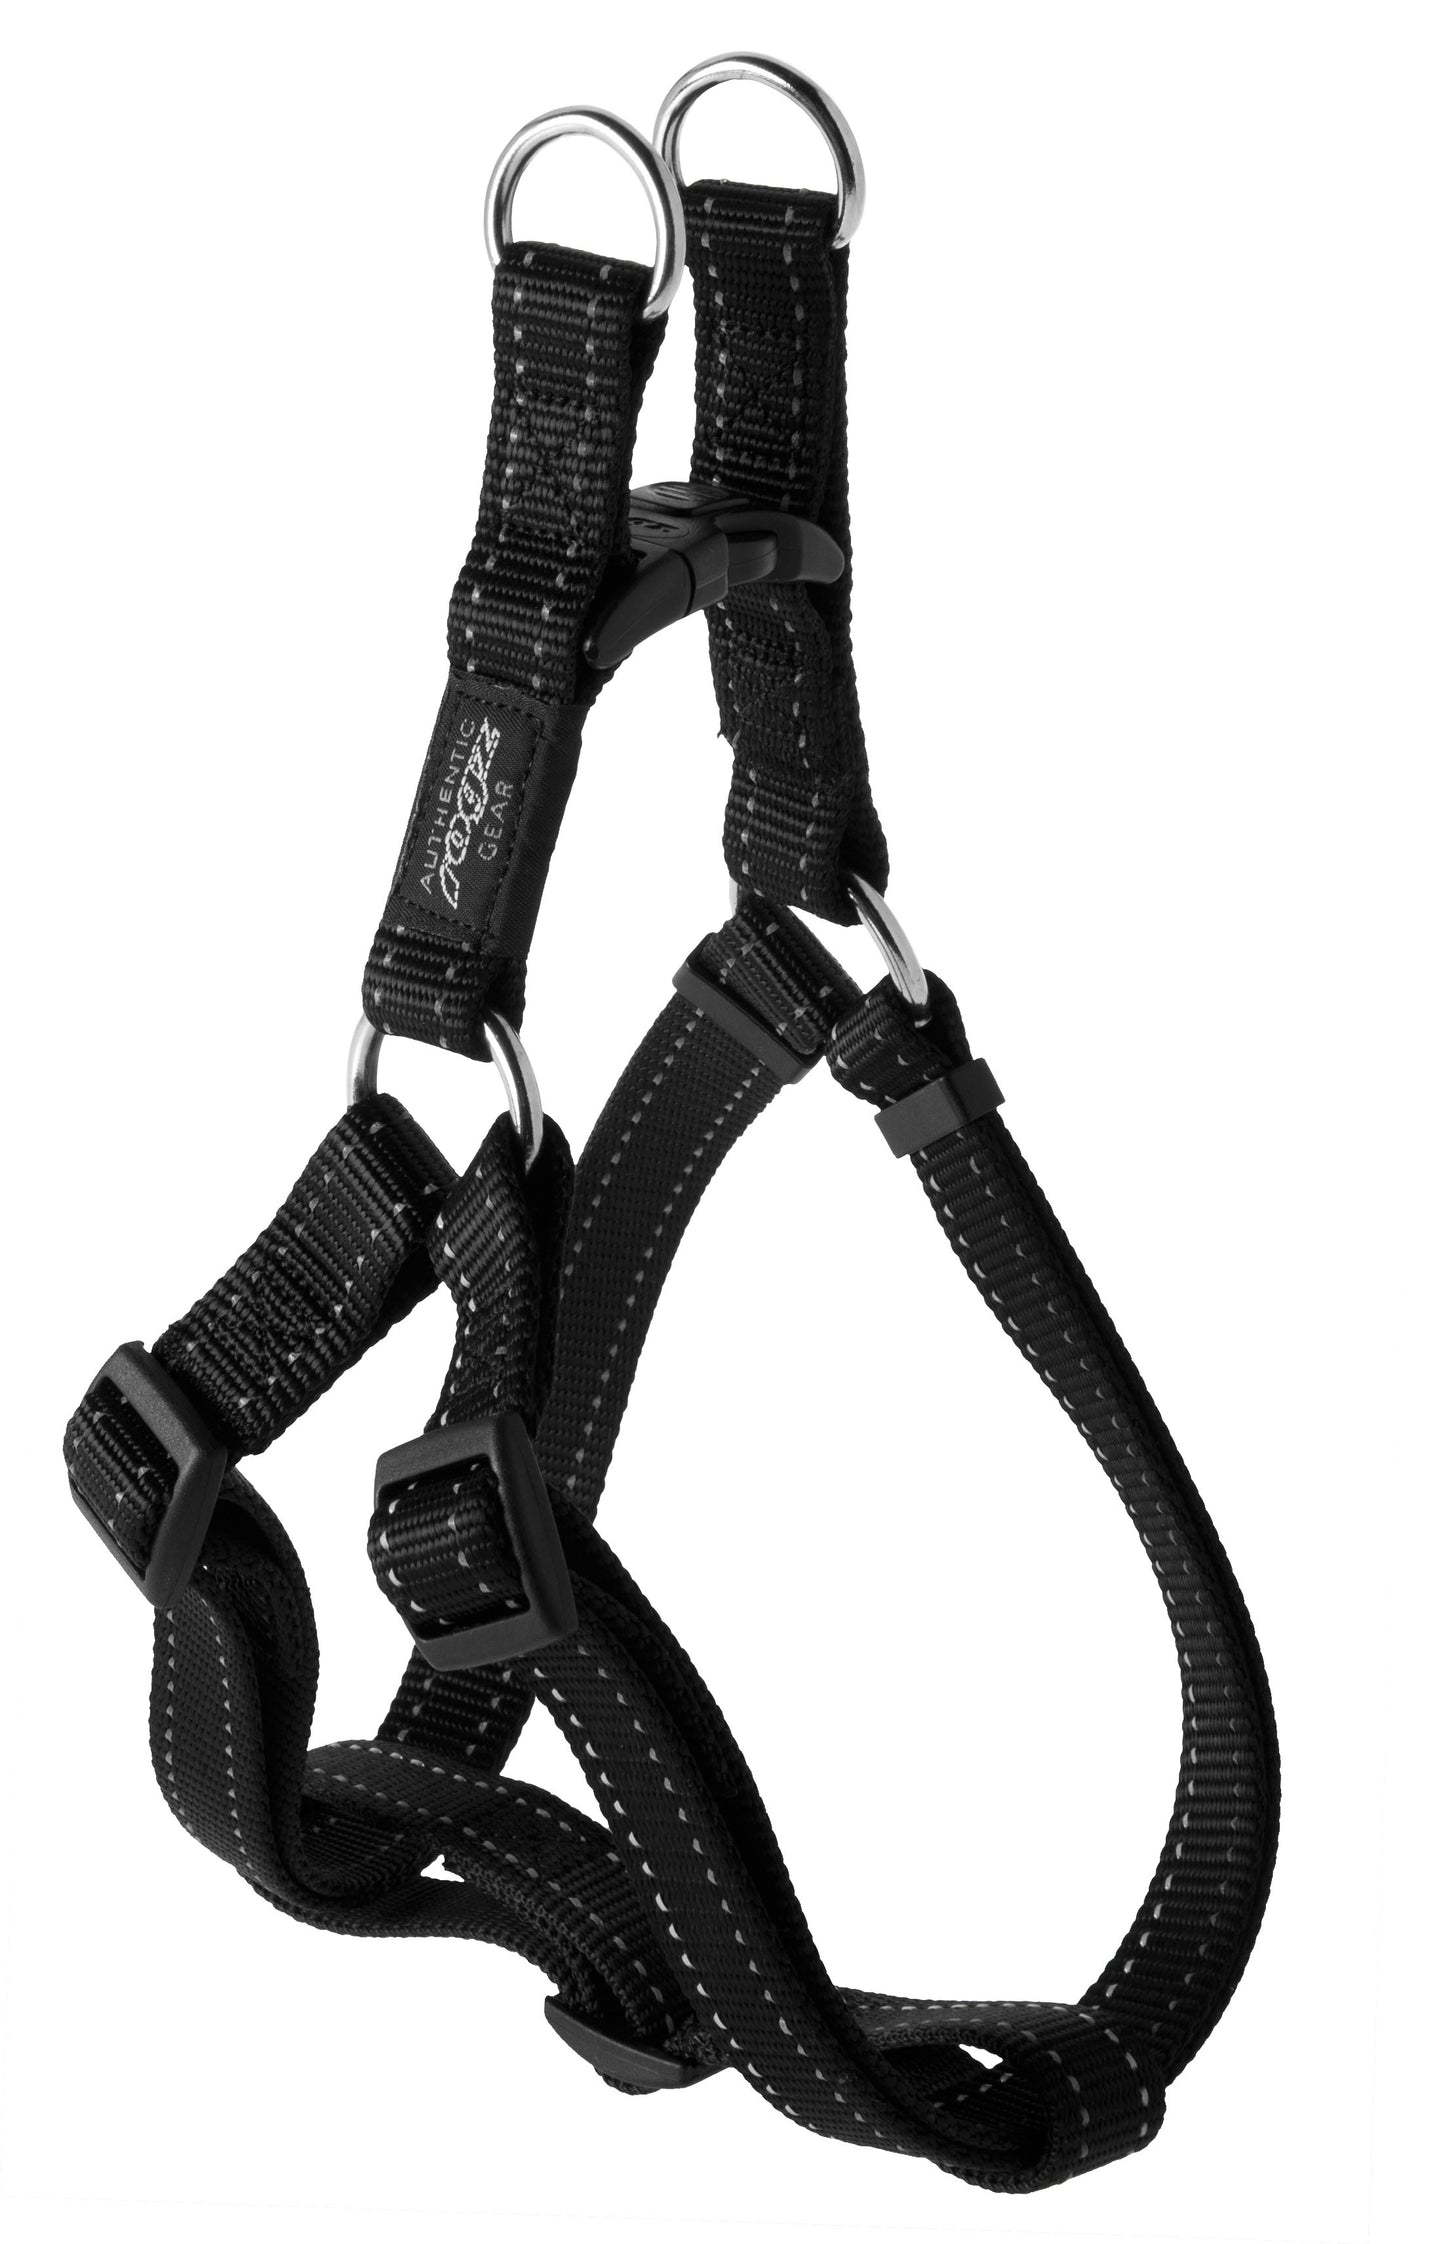 LARGE STEP-IN HARNESS